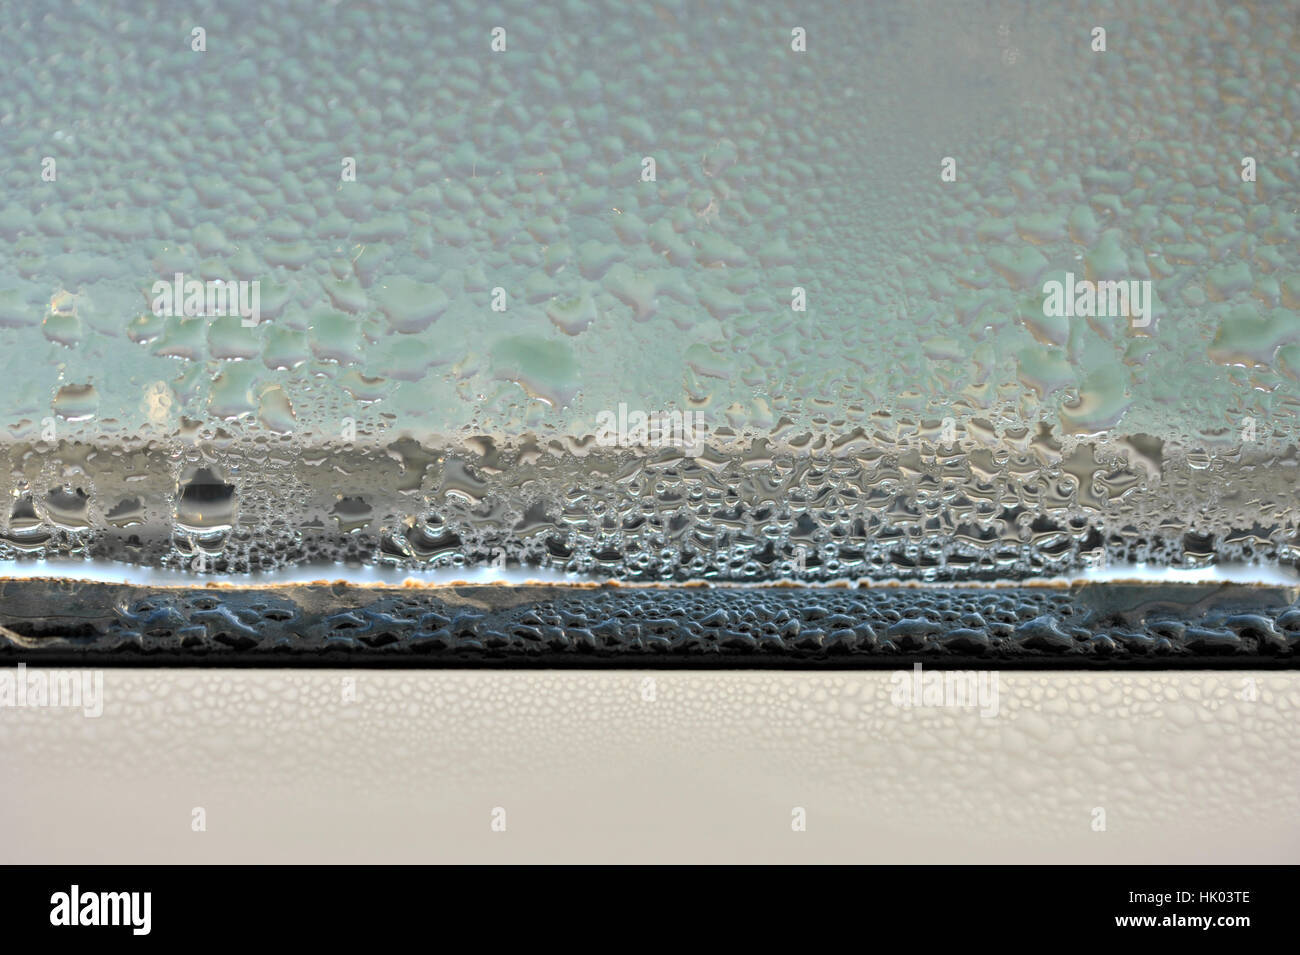 Condensation and damp problem on the inside of a double glazed window. Stock Photo